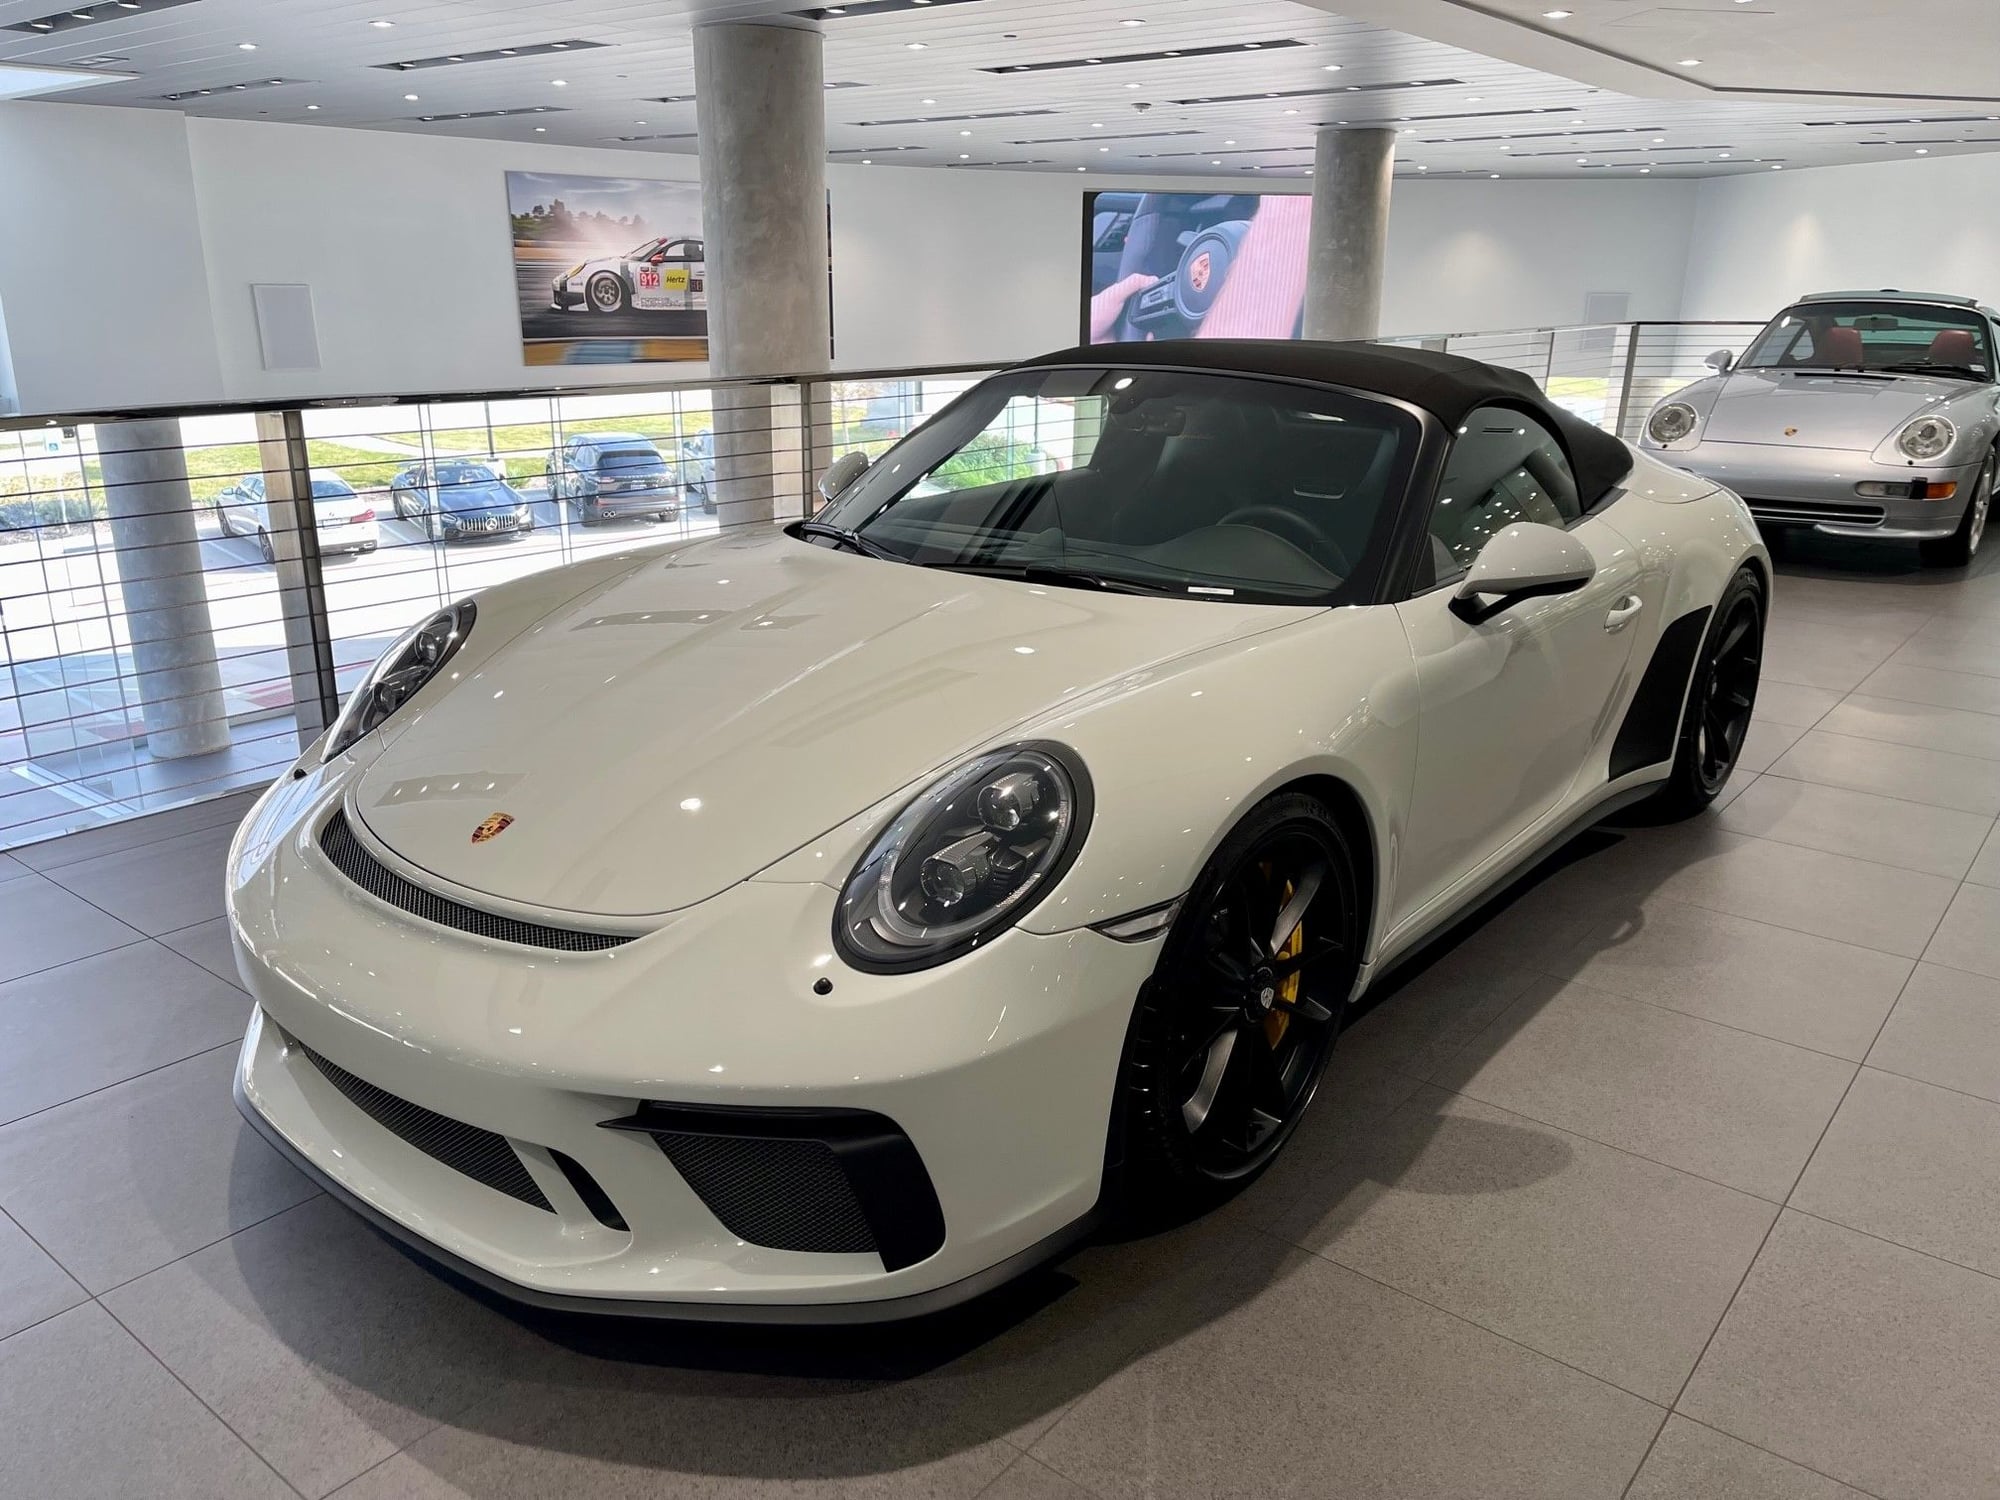 2019 Porsche 911 - 2019 911 Speedster PTS Dolphin Grey CPO Delivery Miles - Used - VIN WP0CF2A97KS172442 - 32 Miles - 6 cyl - 2WD - Manual - Convertible - Gray - Austin, TX 78759, United States